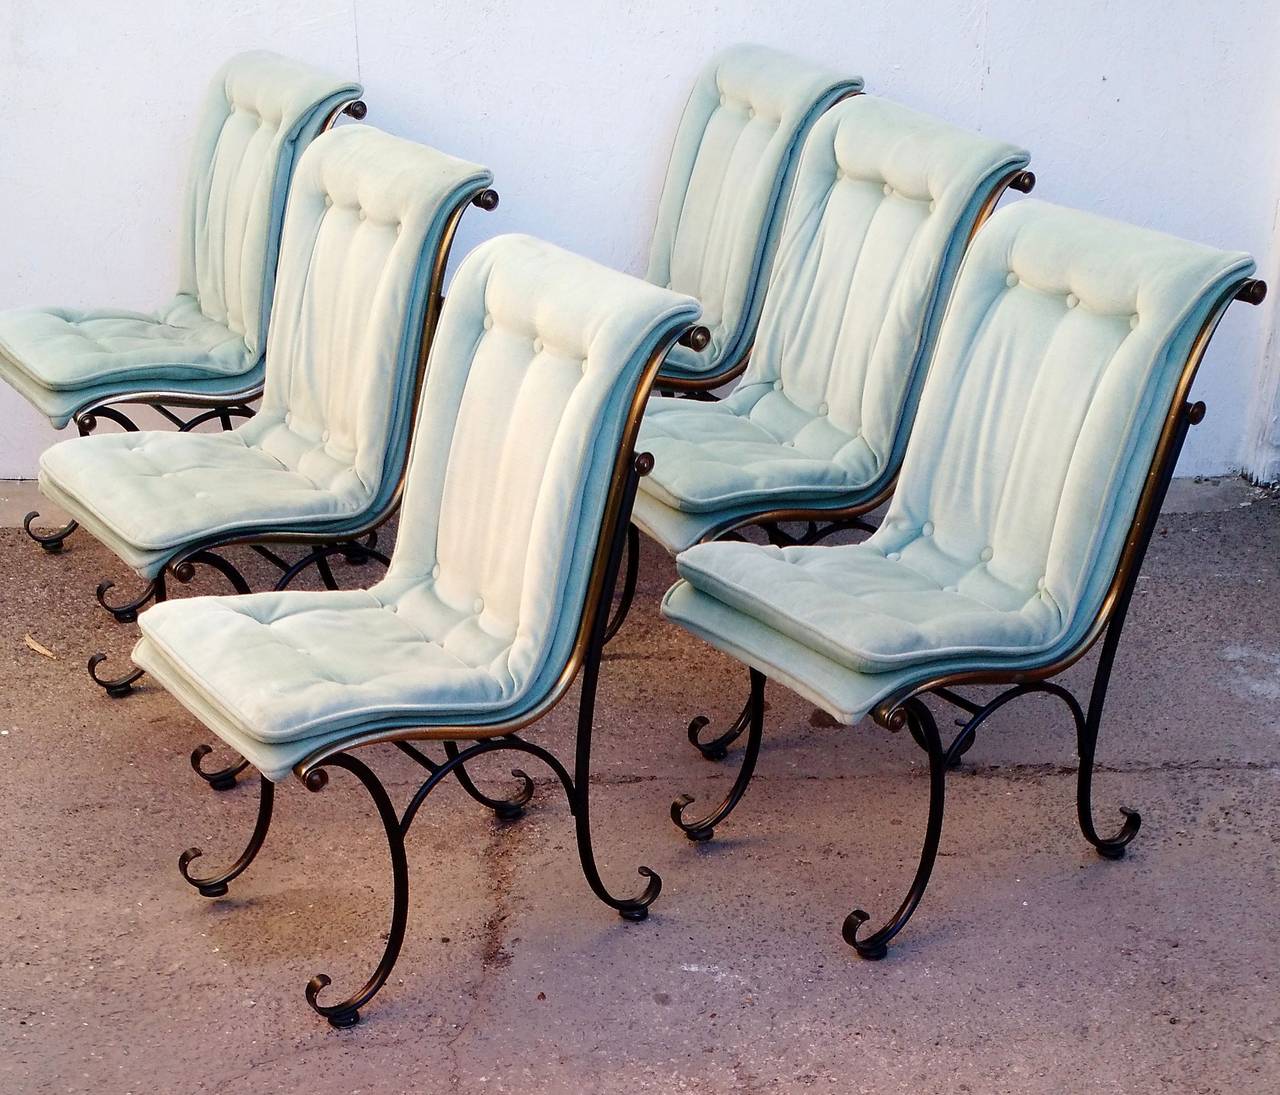 Rare 1960s iron and brass sculptural dining chair by Lee L. Woodard & CO.
upholstered in powder blue velvet.
Set of six chairs in solid condition showing minimal wear.
I have the matching table for this set which I will be posting for sale soon